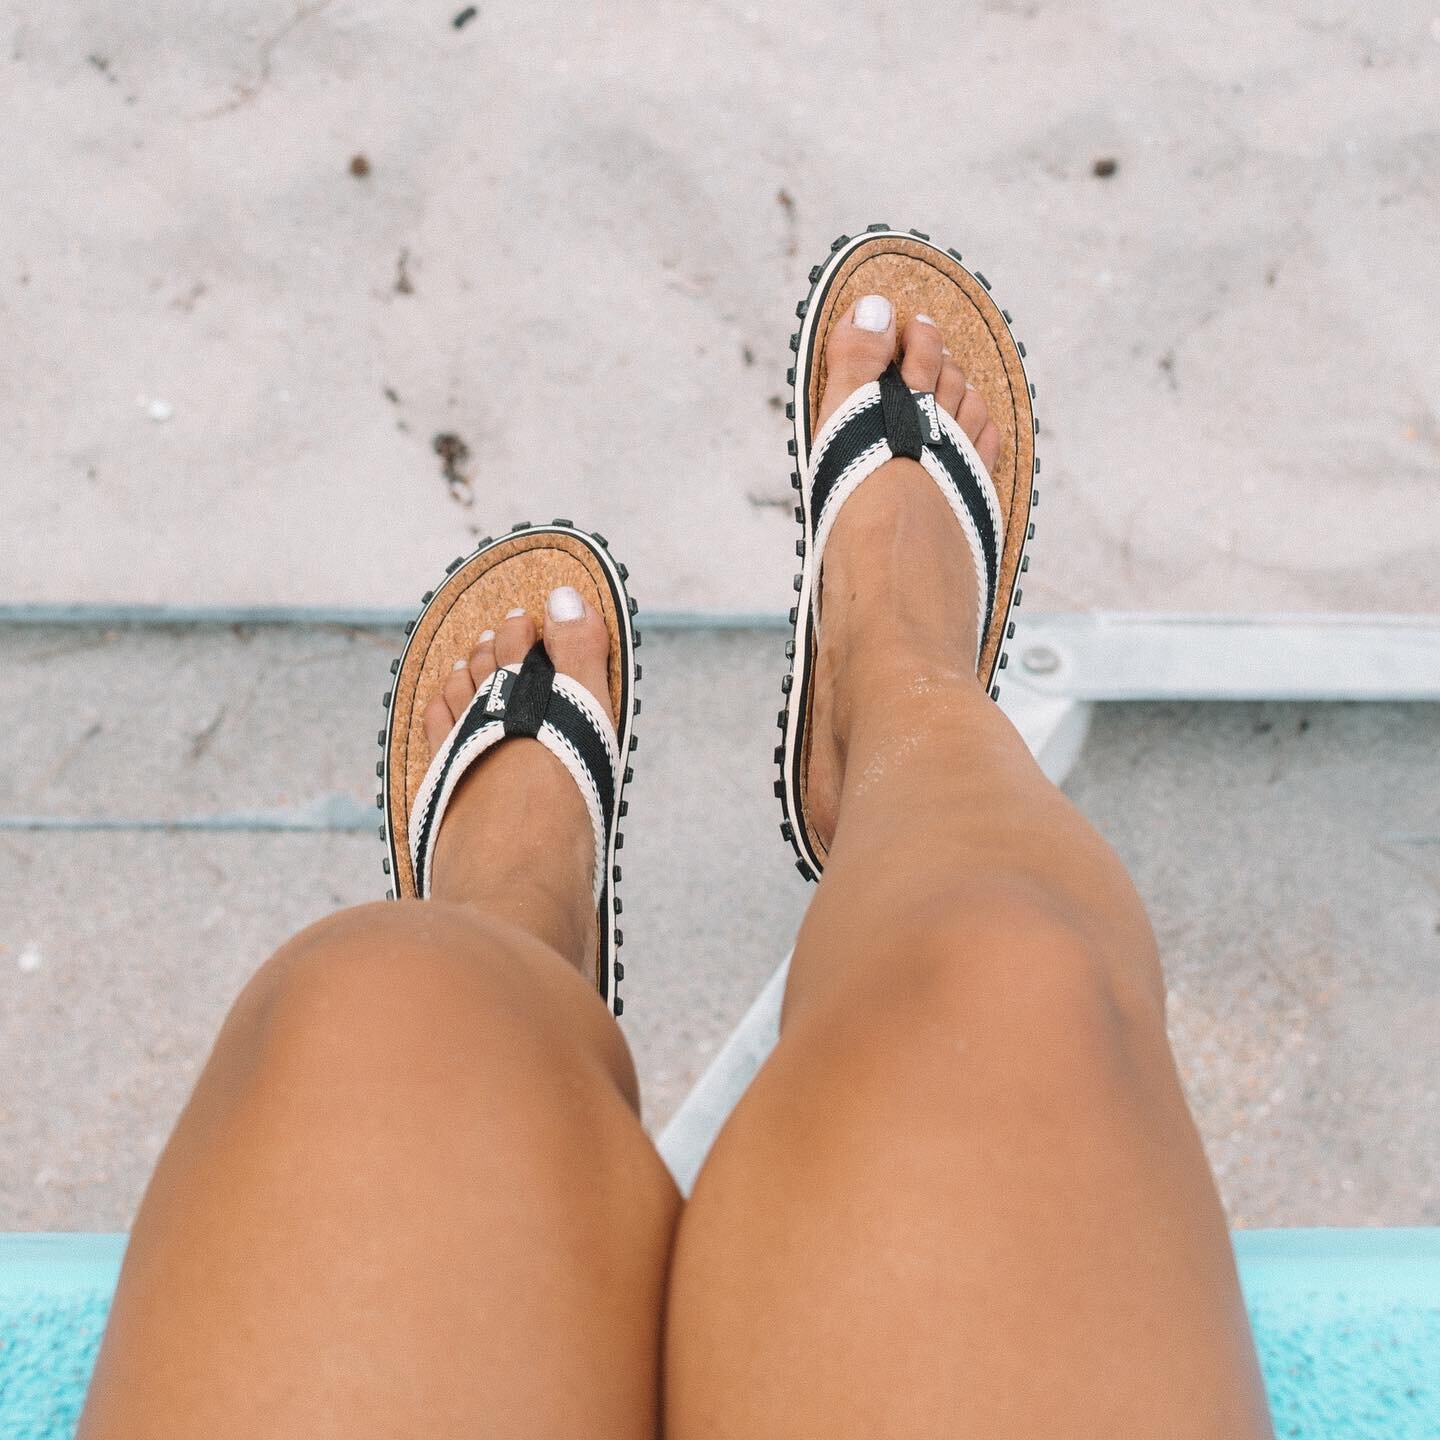 Flip flop season is around the corner! Prep your toes so you&rsquo;ll be flip flop ready after this weeks rain 😎

All pedicures includes a Basalt Hot Stone Massage, Hot Towel, and a basic colour polish. 

Upgrade to a Spa Pedicure which includes our